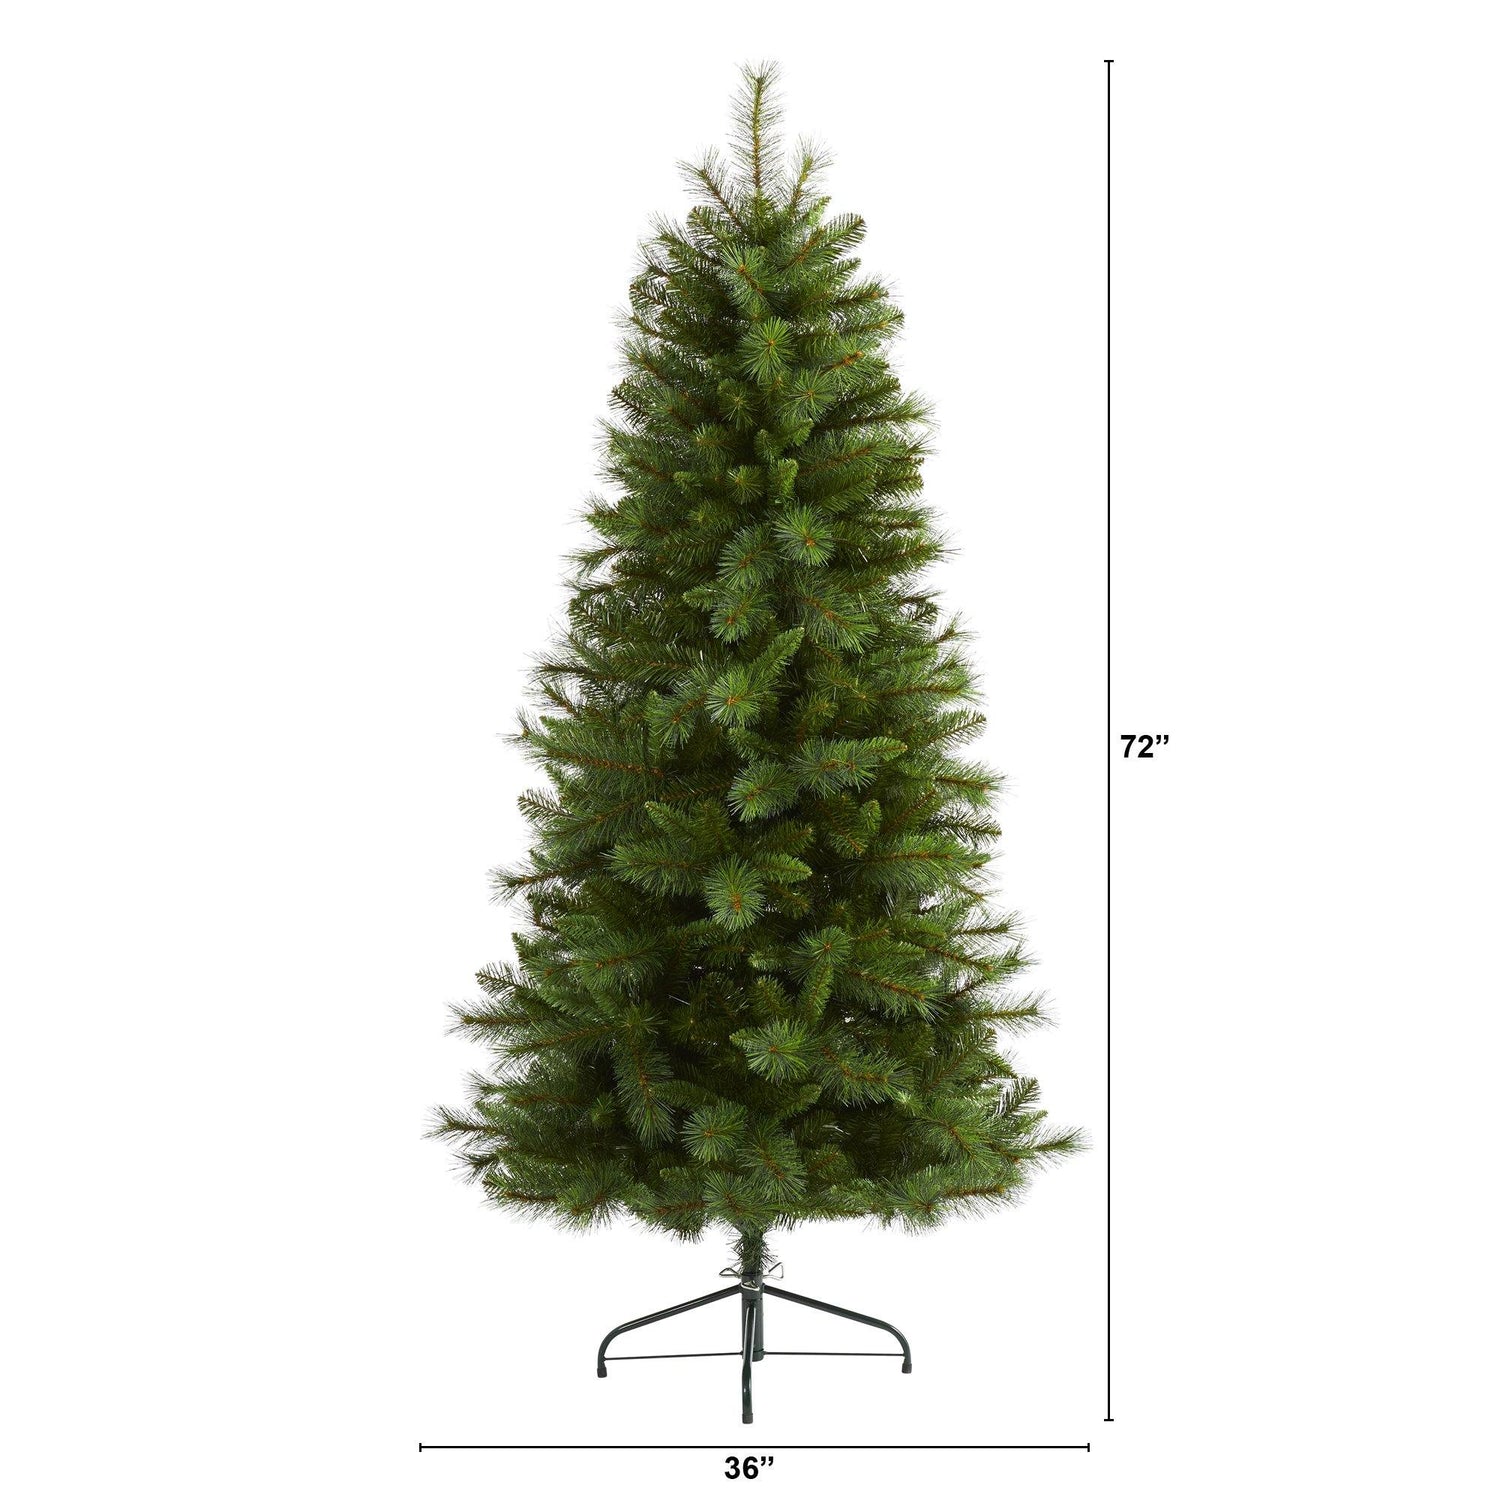 https://cdn.shopify.com/s/files/1/0108/9460/6436/products/artificial-6-slim-west-virginia-mountain-pine-artificial-christmas-tree-with-629-bendable-branches-nearly-natural-111759.jpg?v=1595286455&width=1500